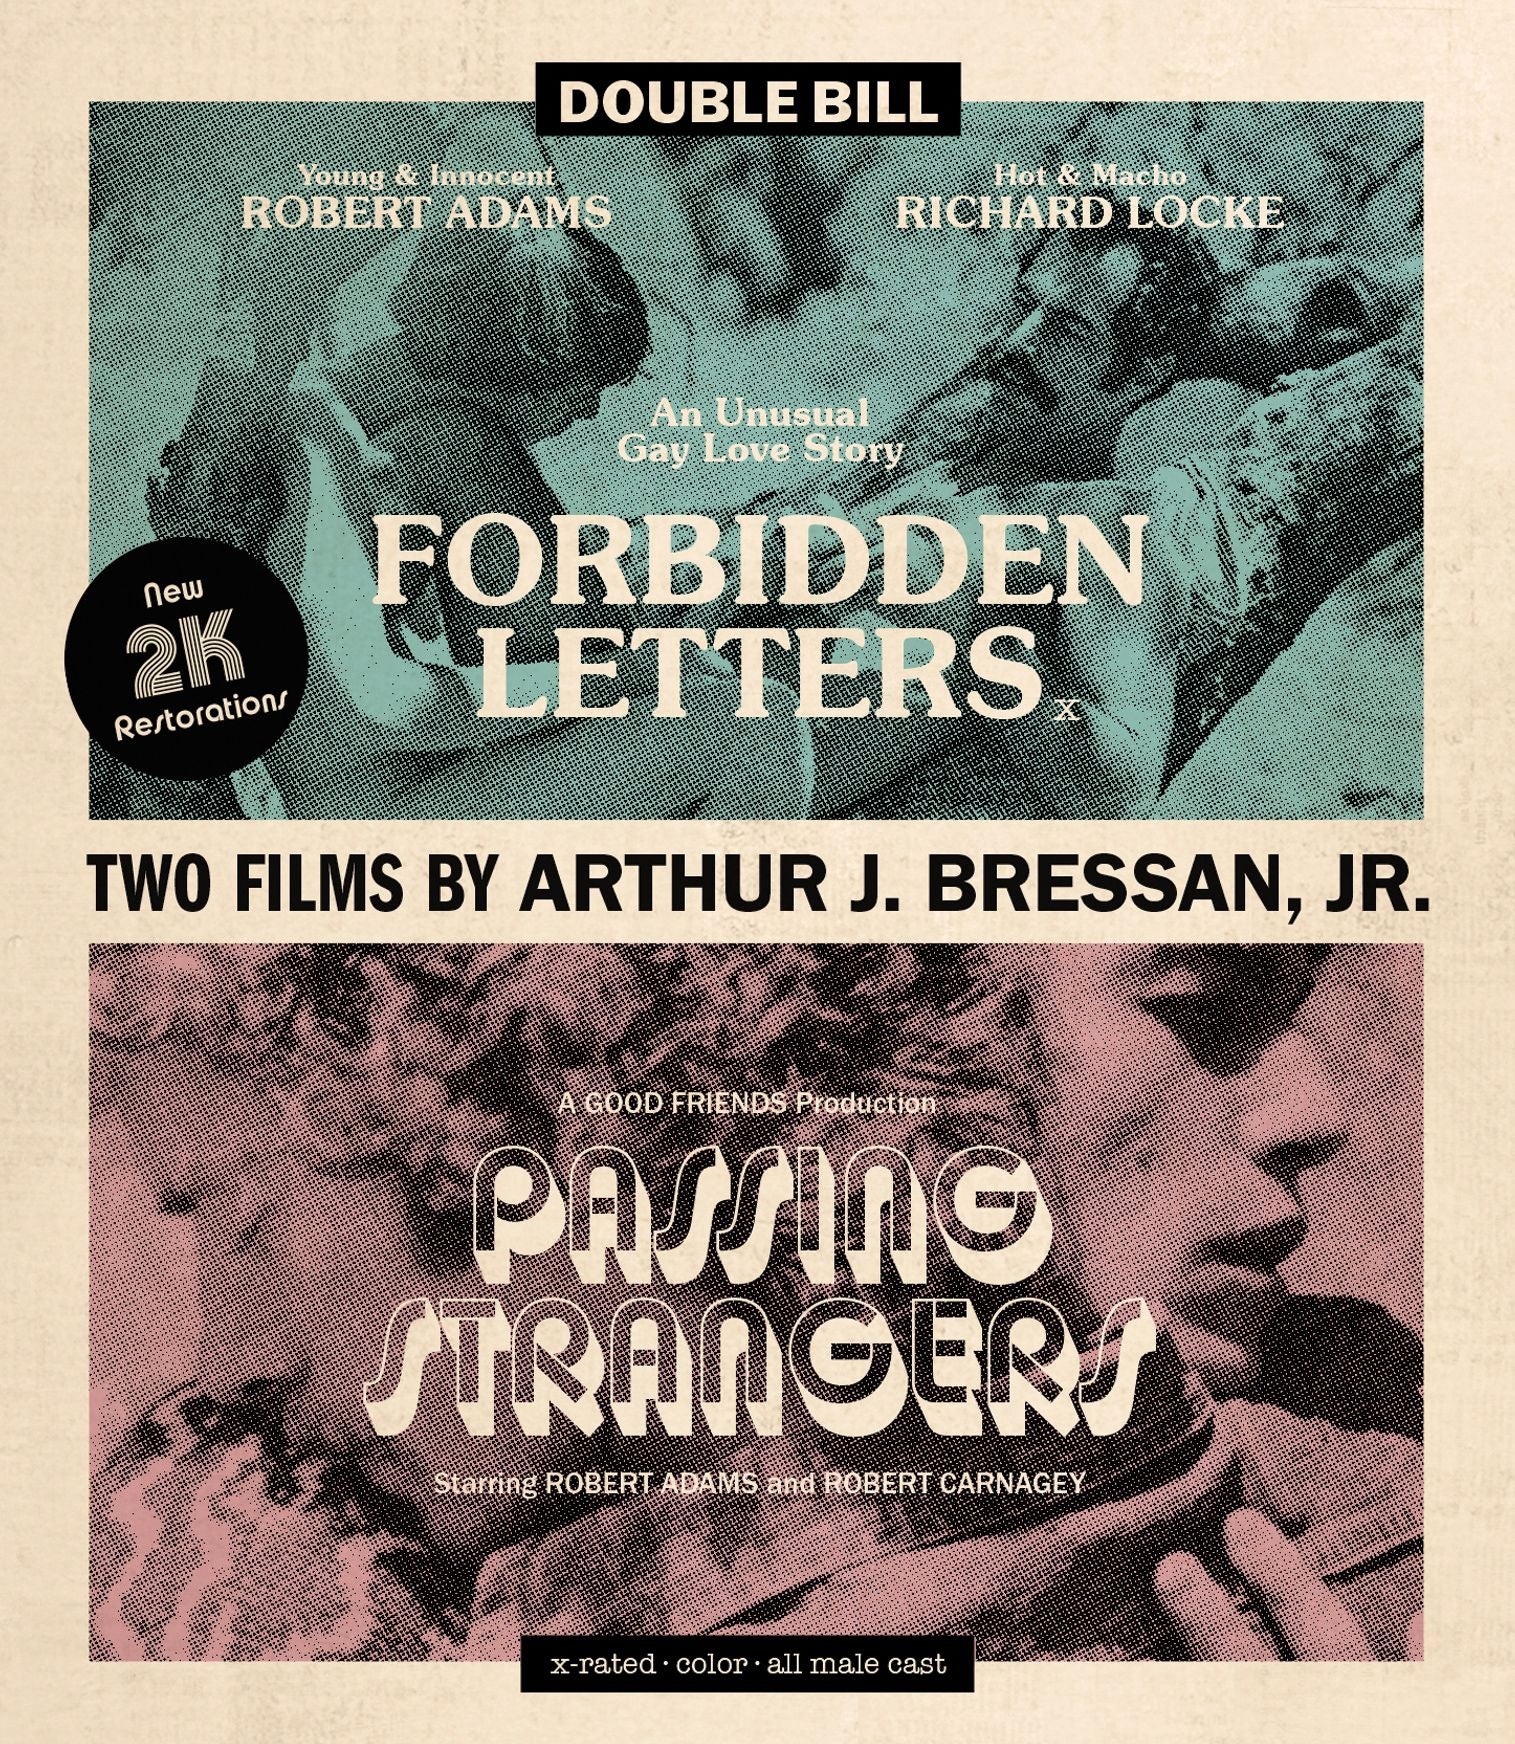 PASSING STRANGERS AND FORBIDDEN LETTERS: TWO FILMS BY ARTHUR J BRESSAN JR BLU-RAY